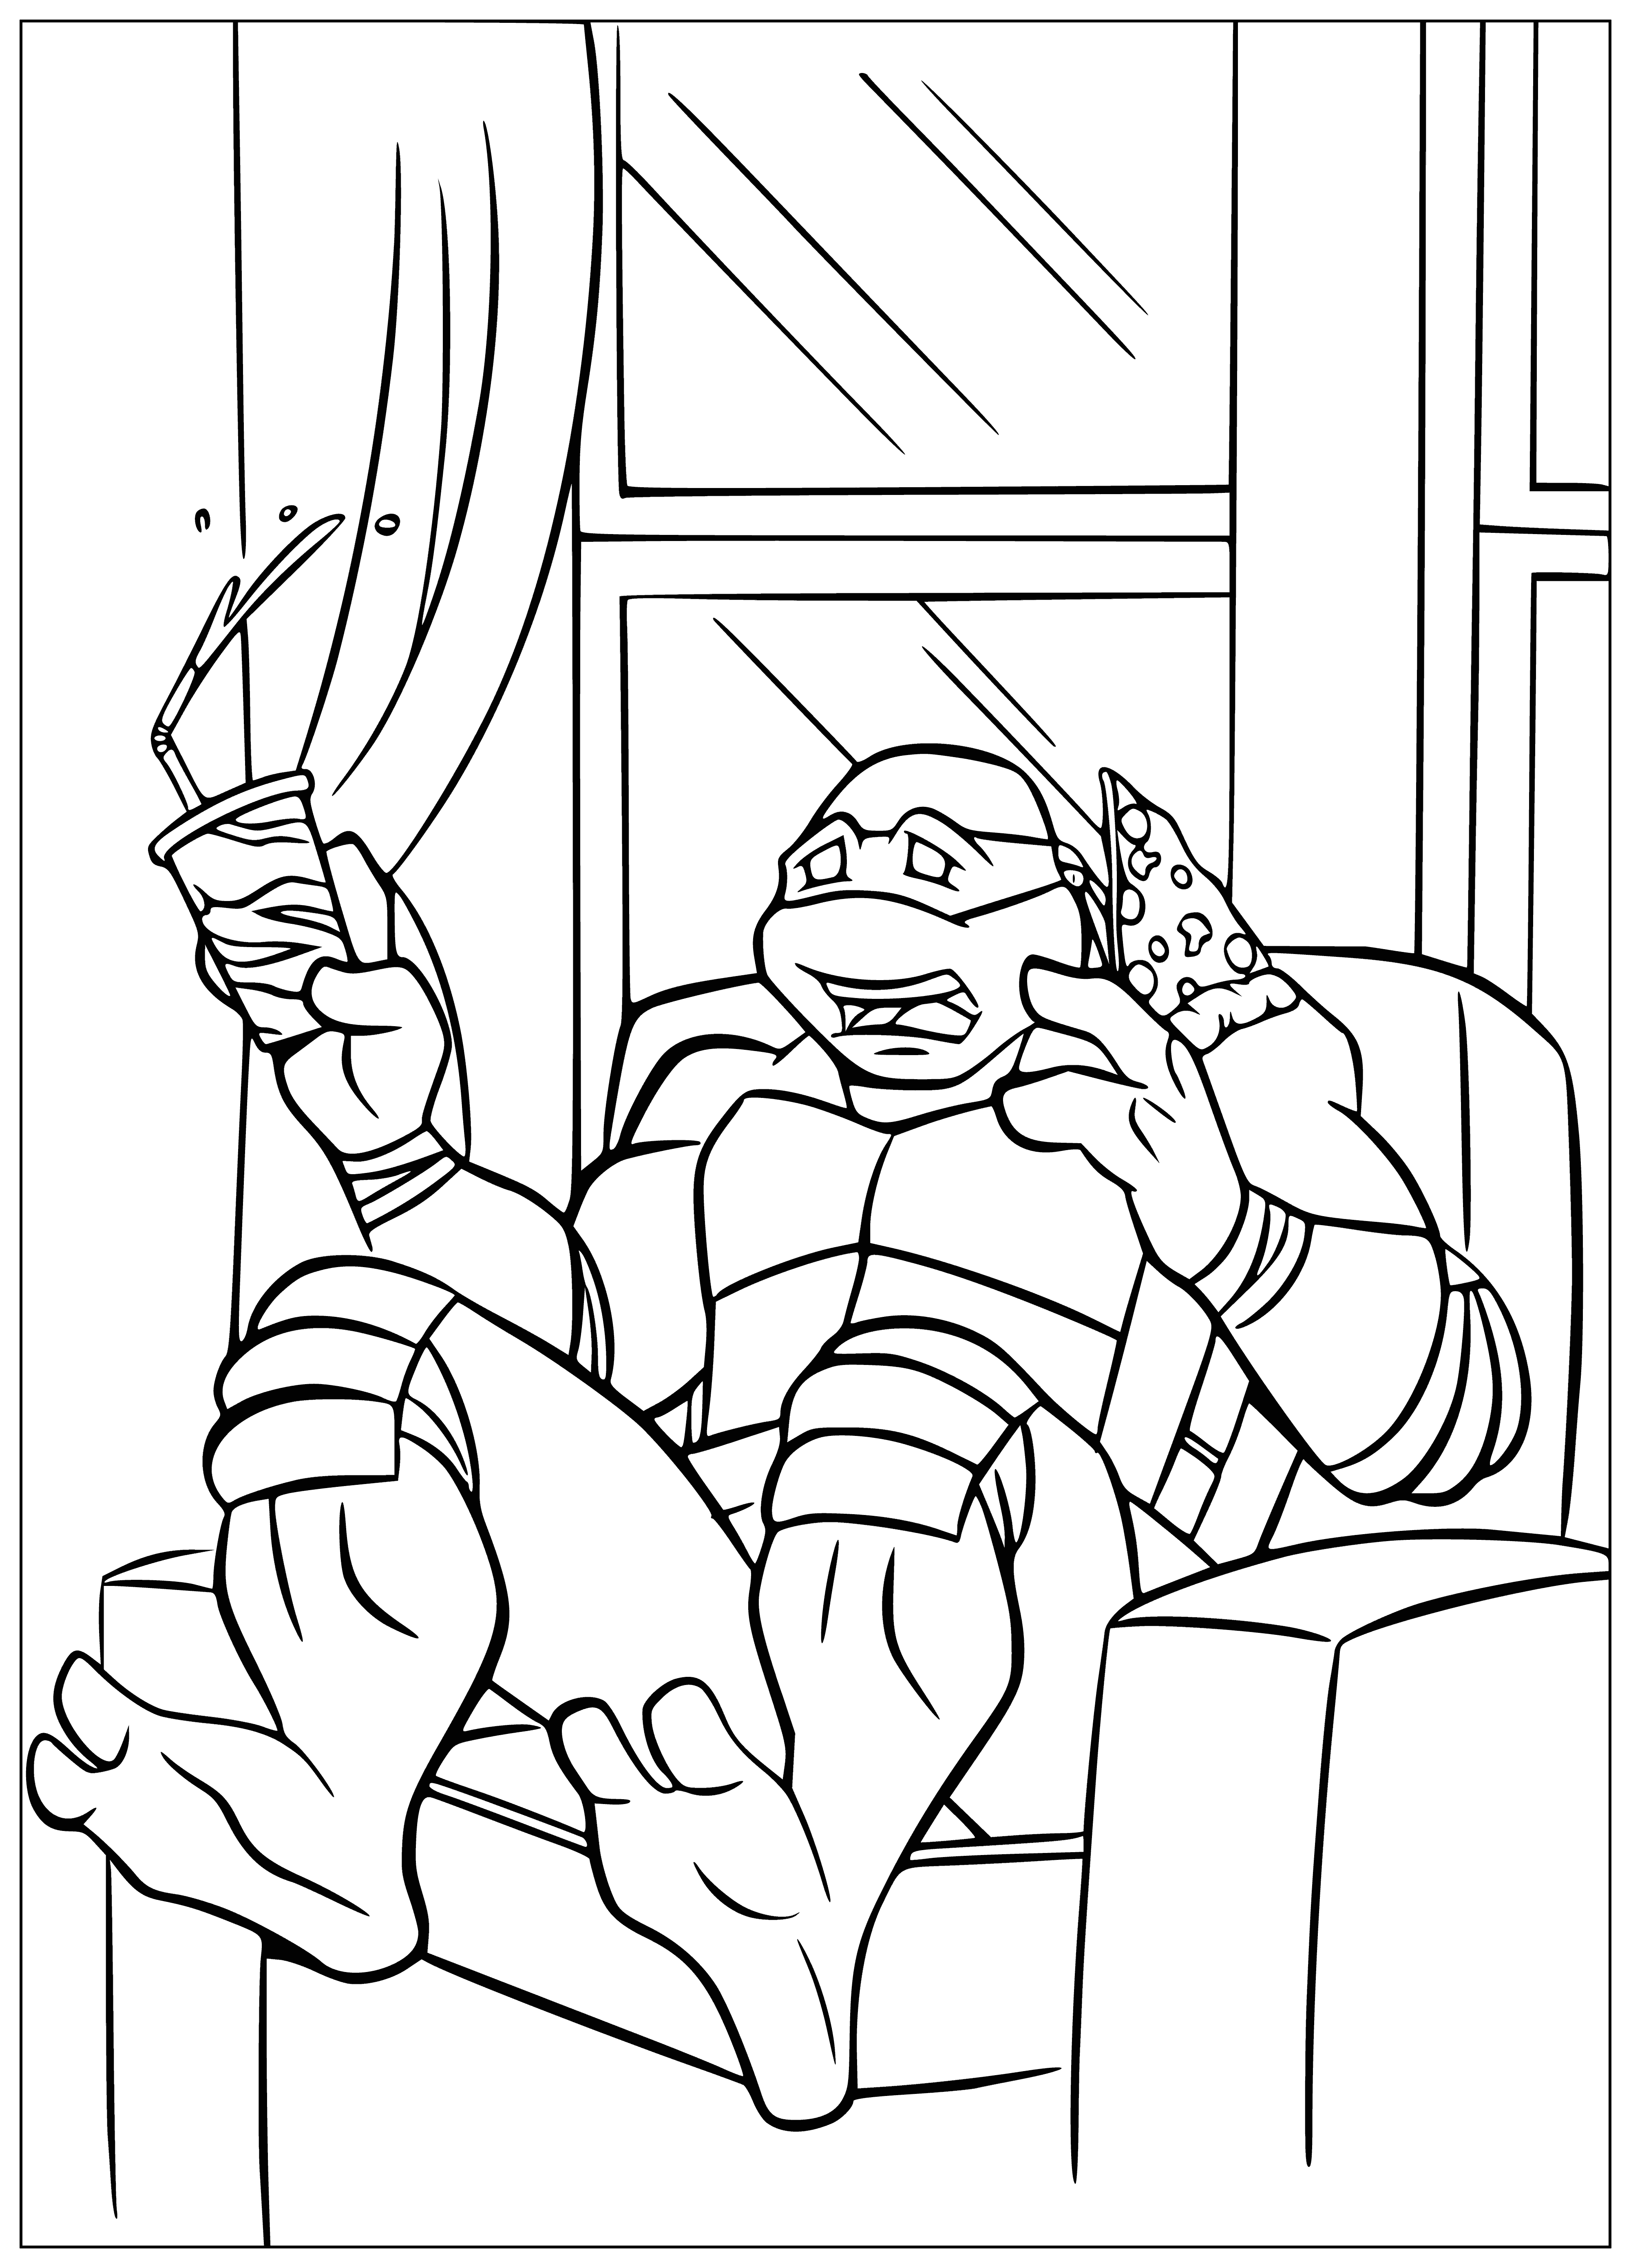 coloring page: Four Ninja Turtles eat pizza, drink cola and chat around a table, wearing two masks. #TMNT #Teamwork